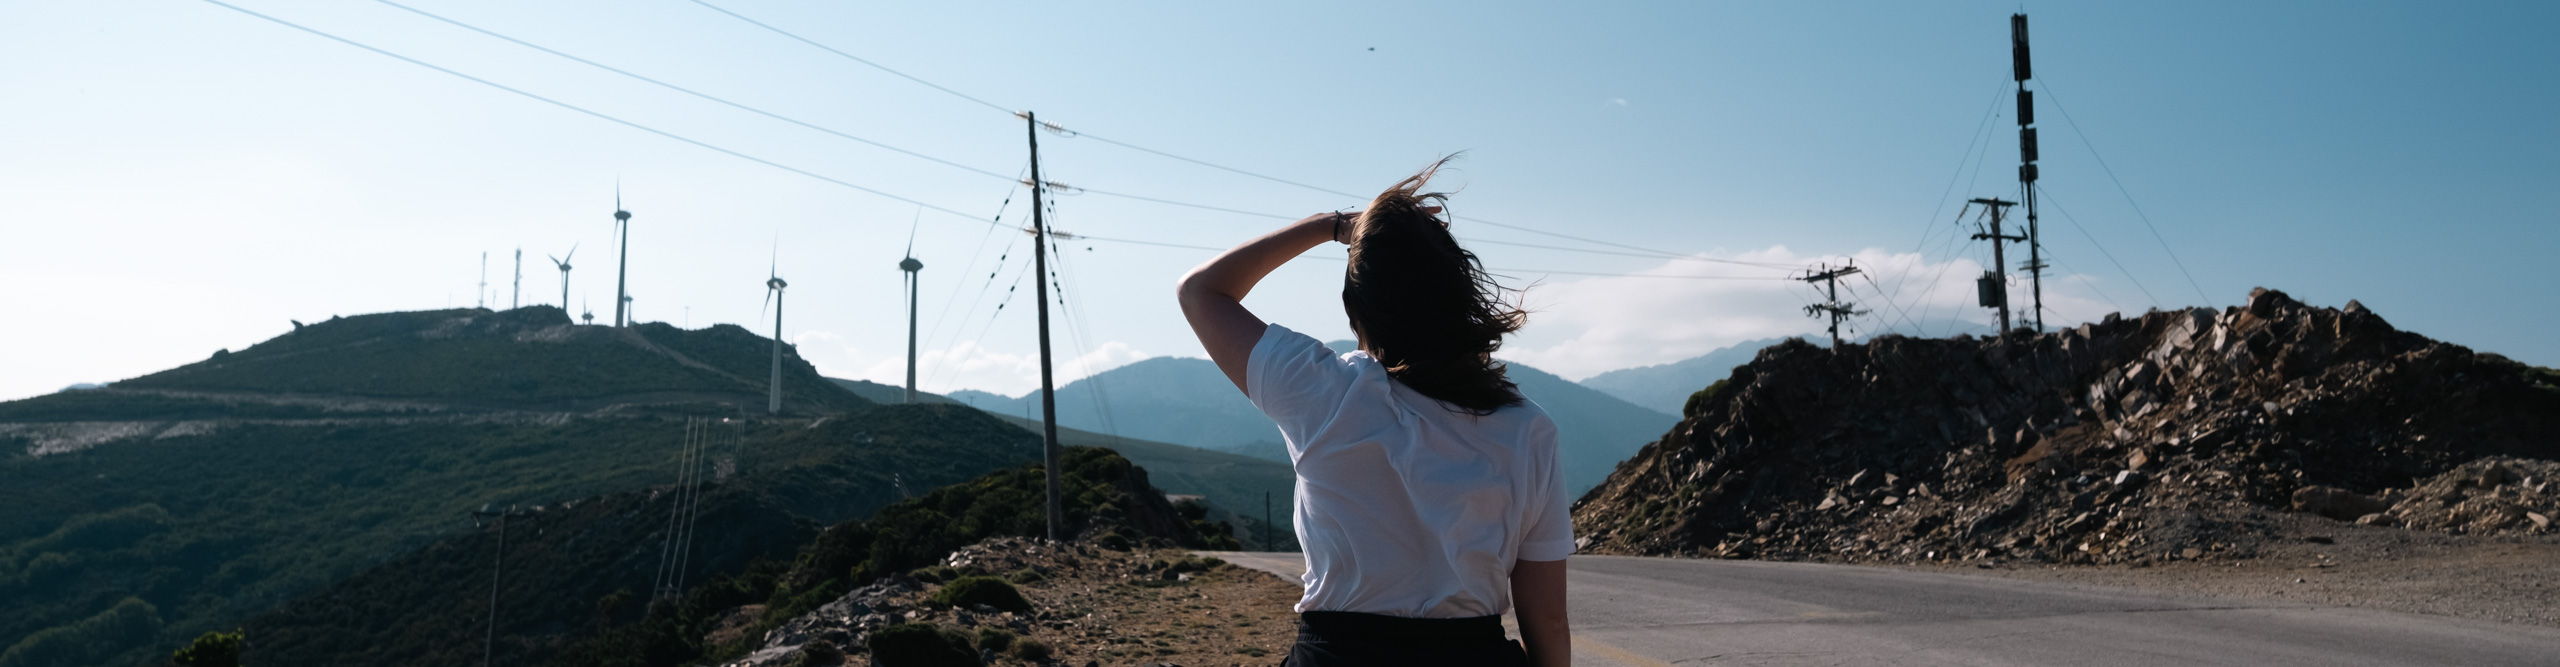 Woman looking at mountain with power lines in front in Greece